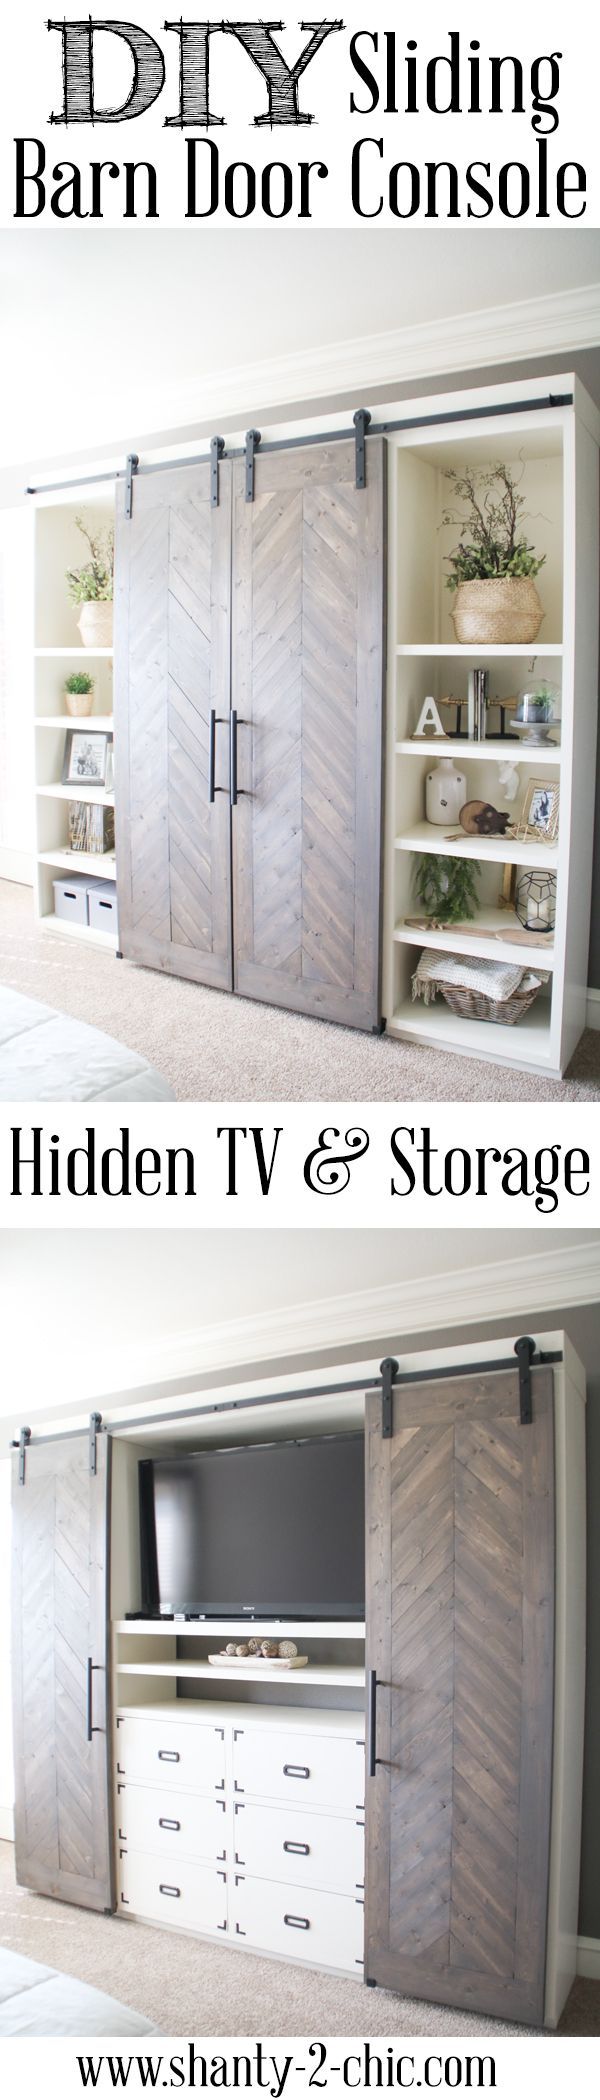 Build this Sliding Barn Door Console! It’s perfect for any room! Hide your TV and add tons of storage! Free plans and tutorial at